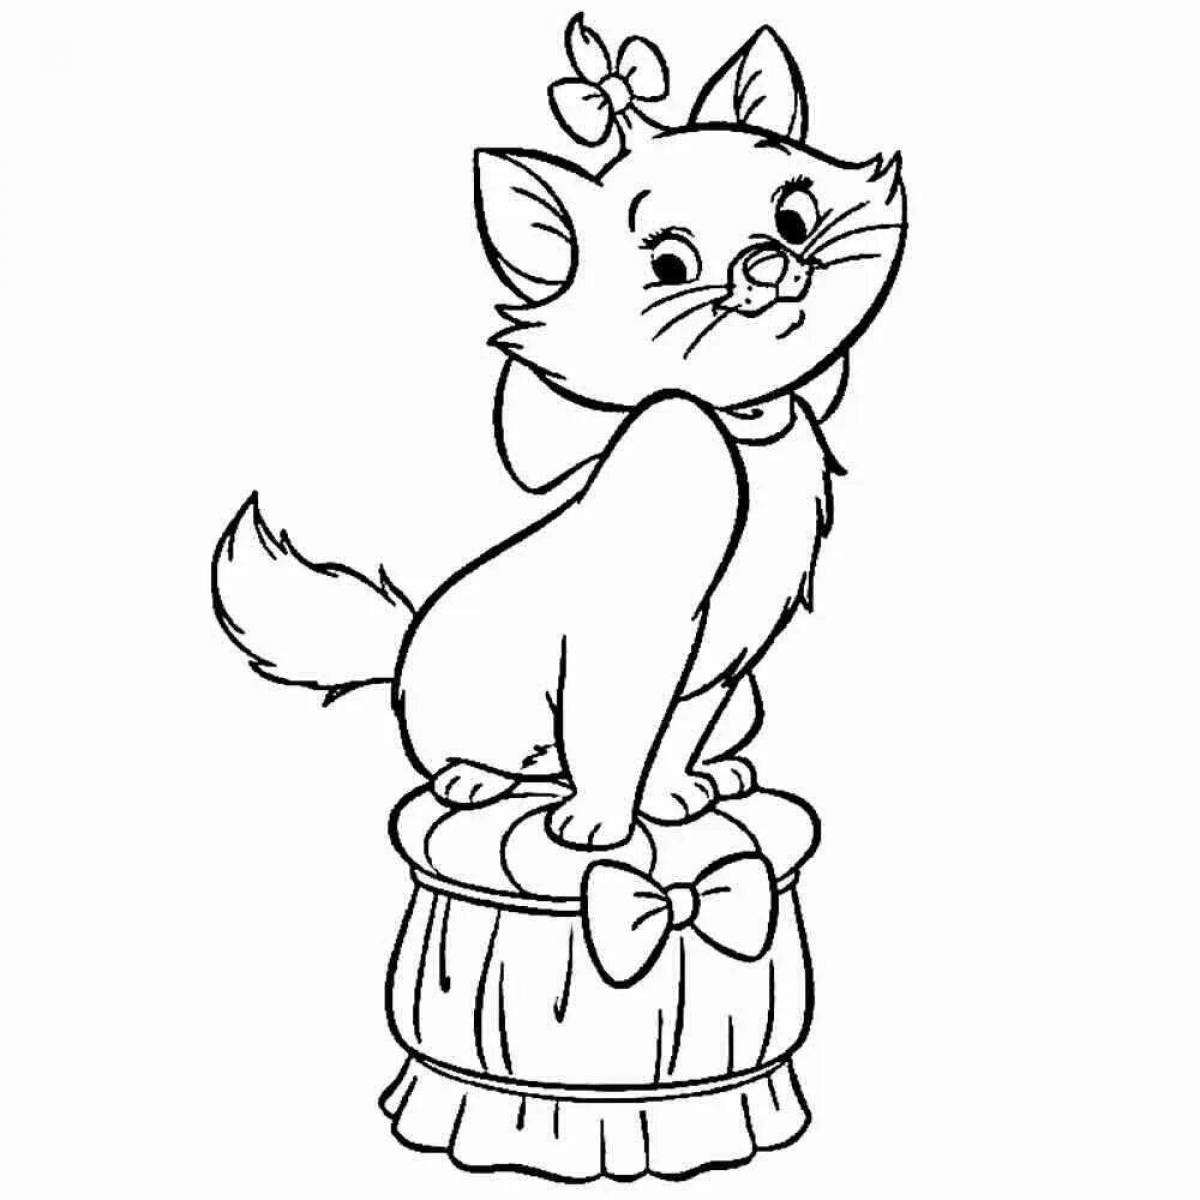 Kitty's fun coloring book for kids